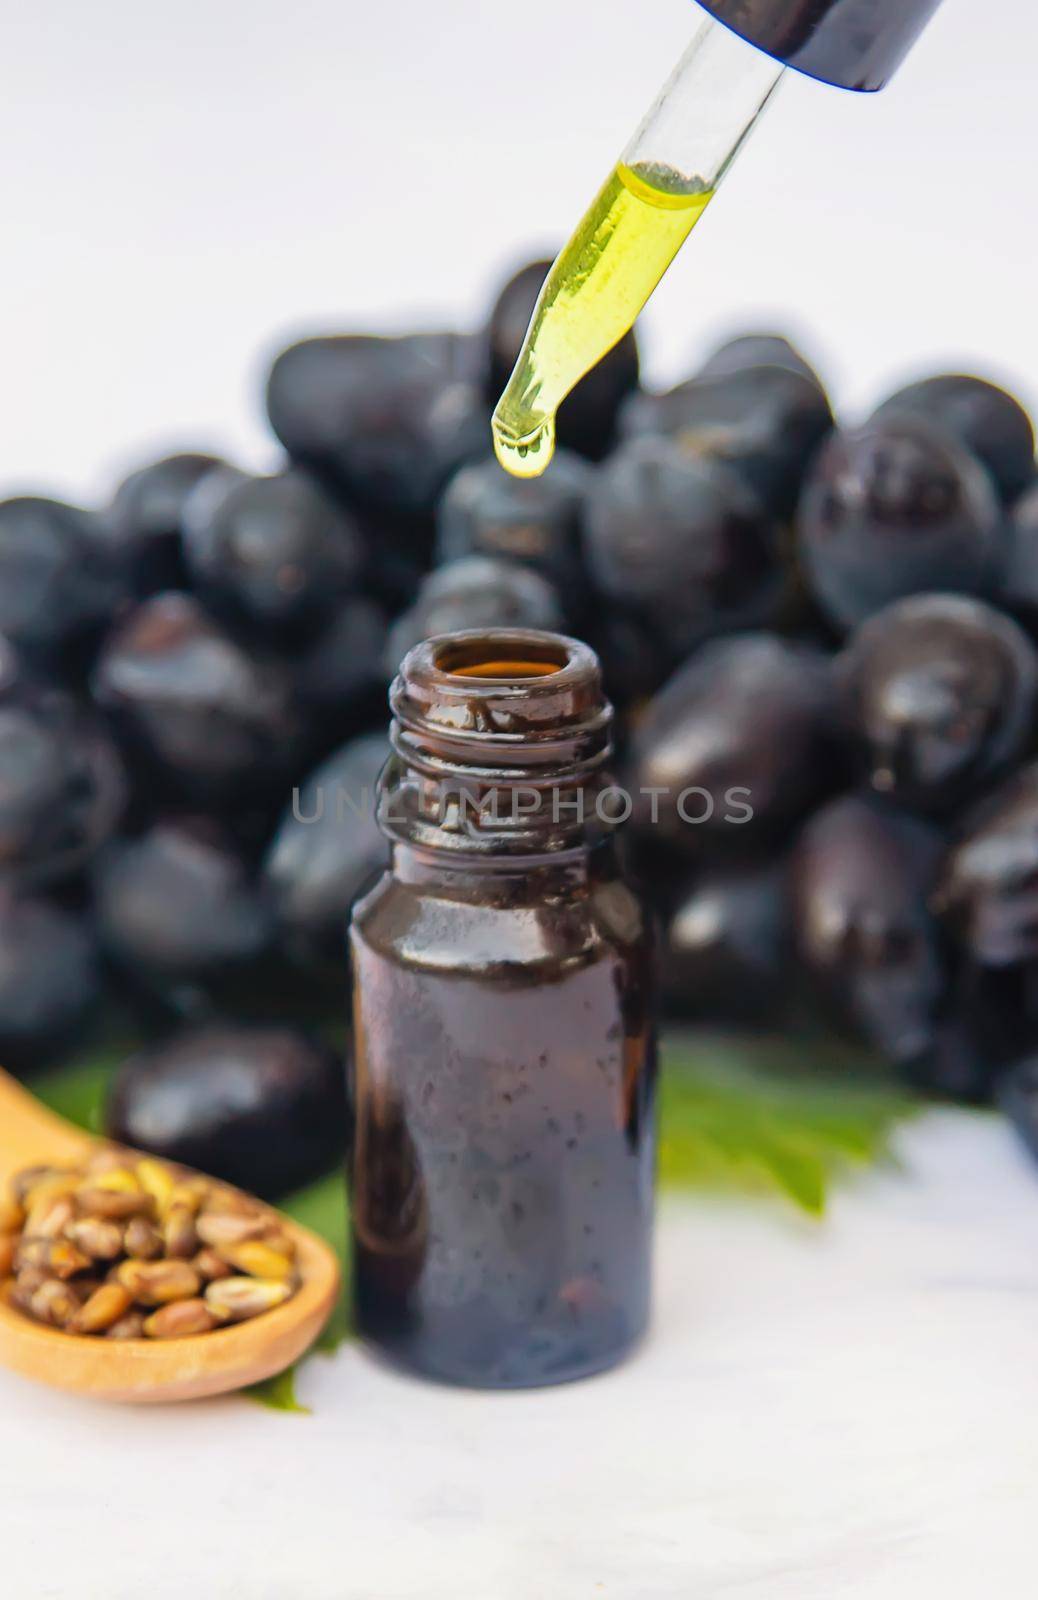 Grape seed oil in a small bottle. Selective focus. nature.